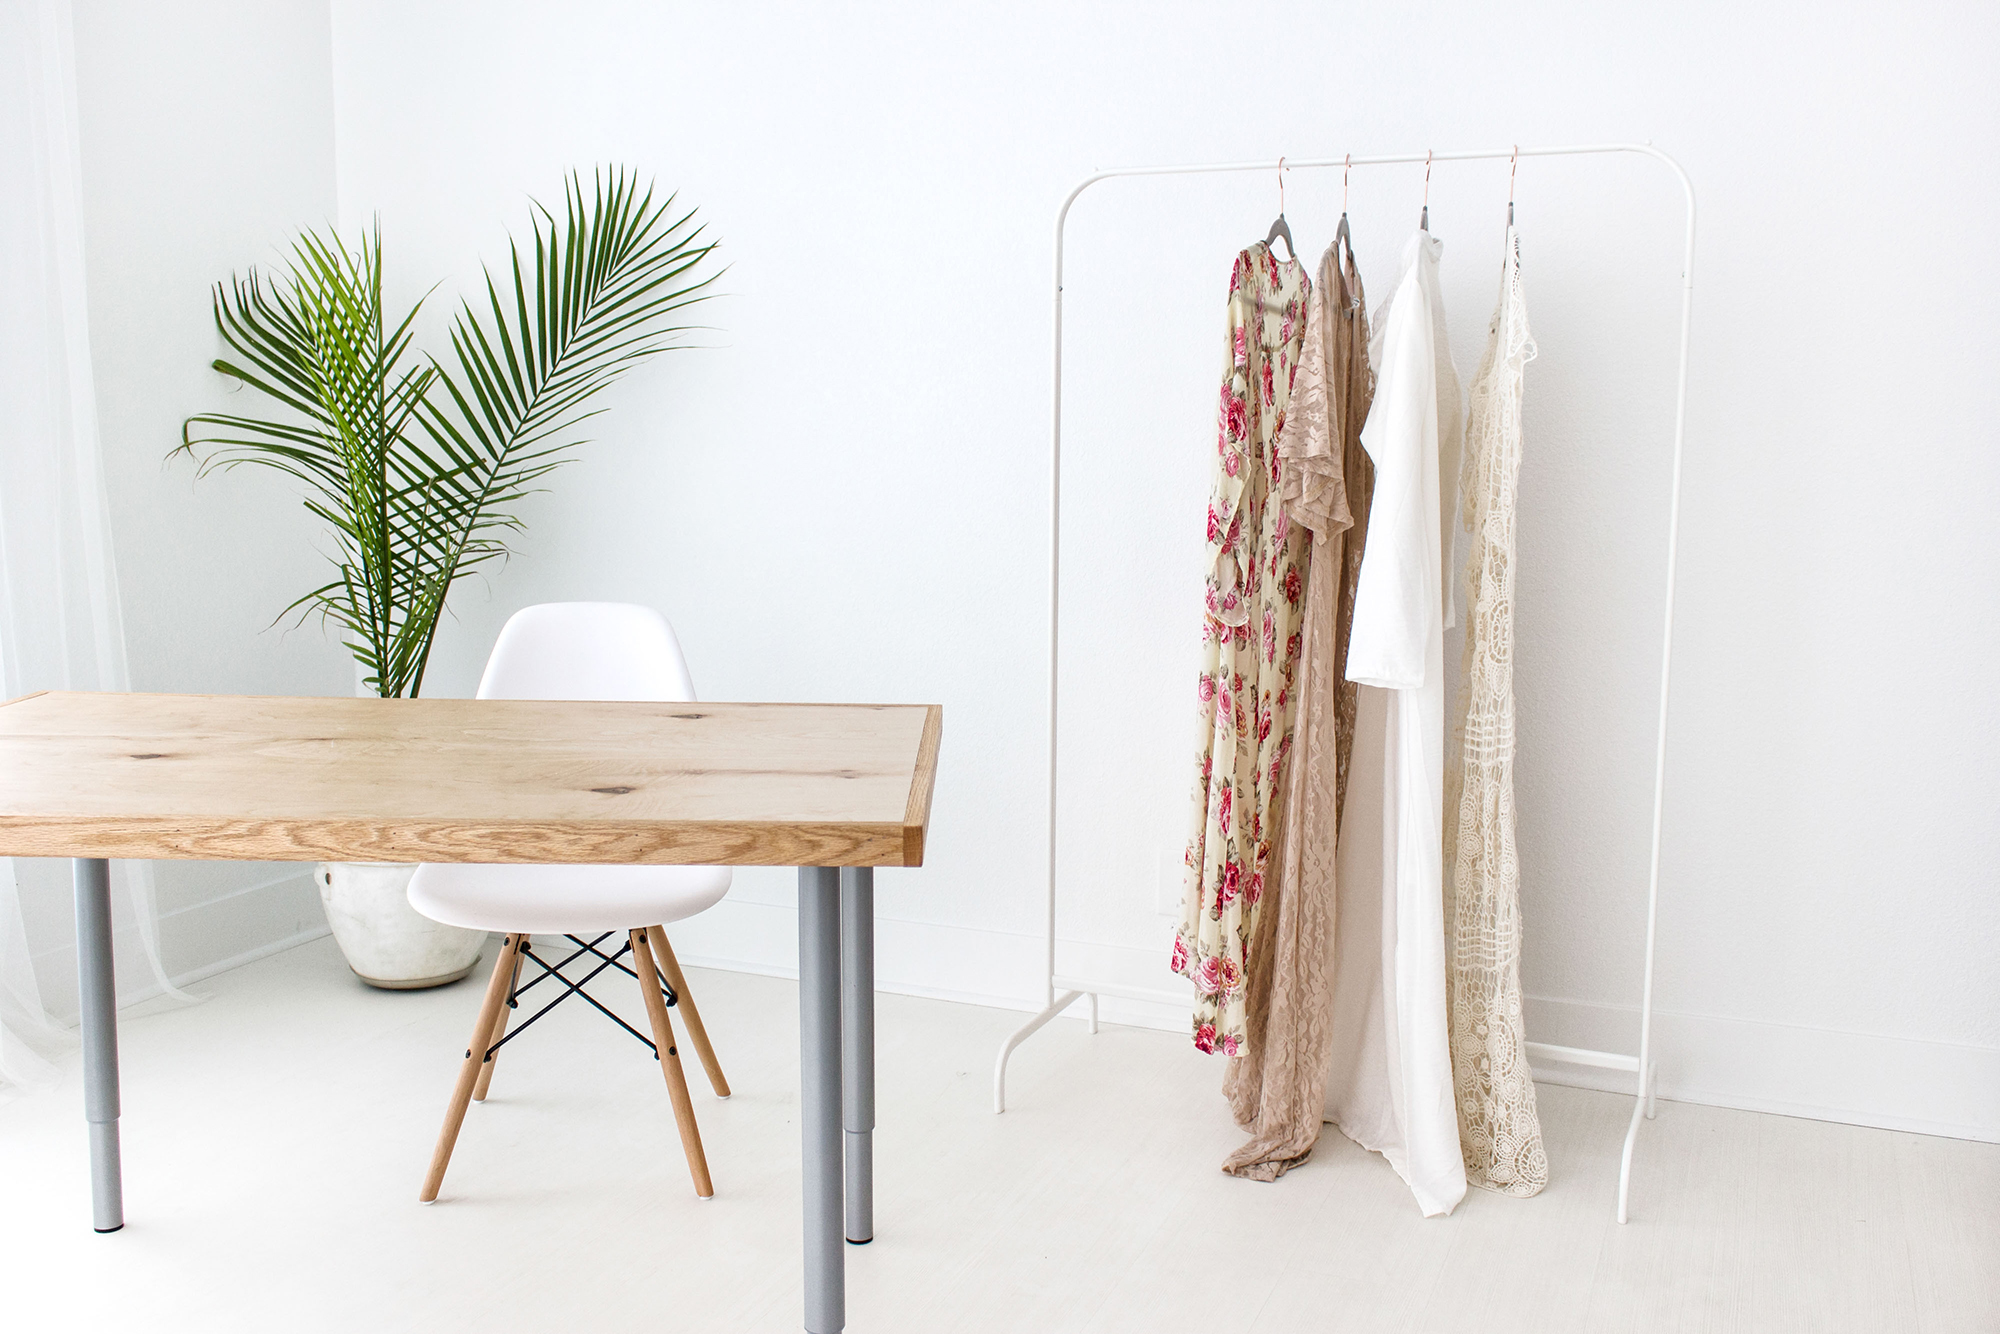 fashion style trends clothing rack